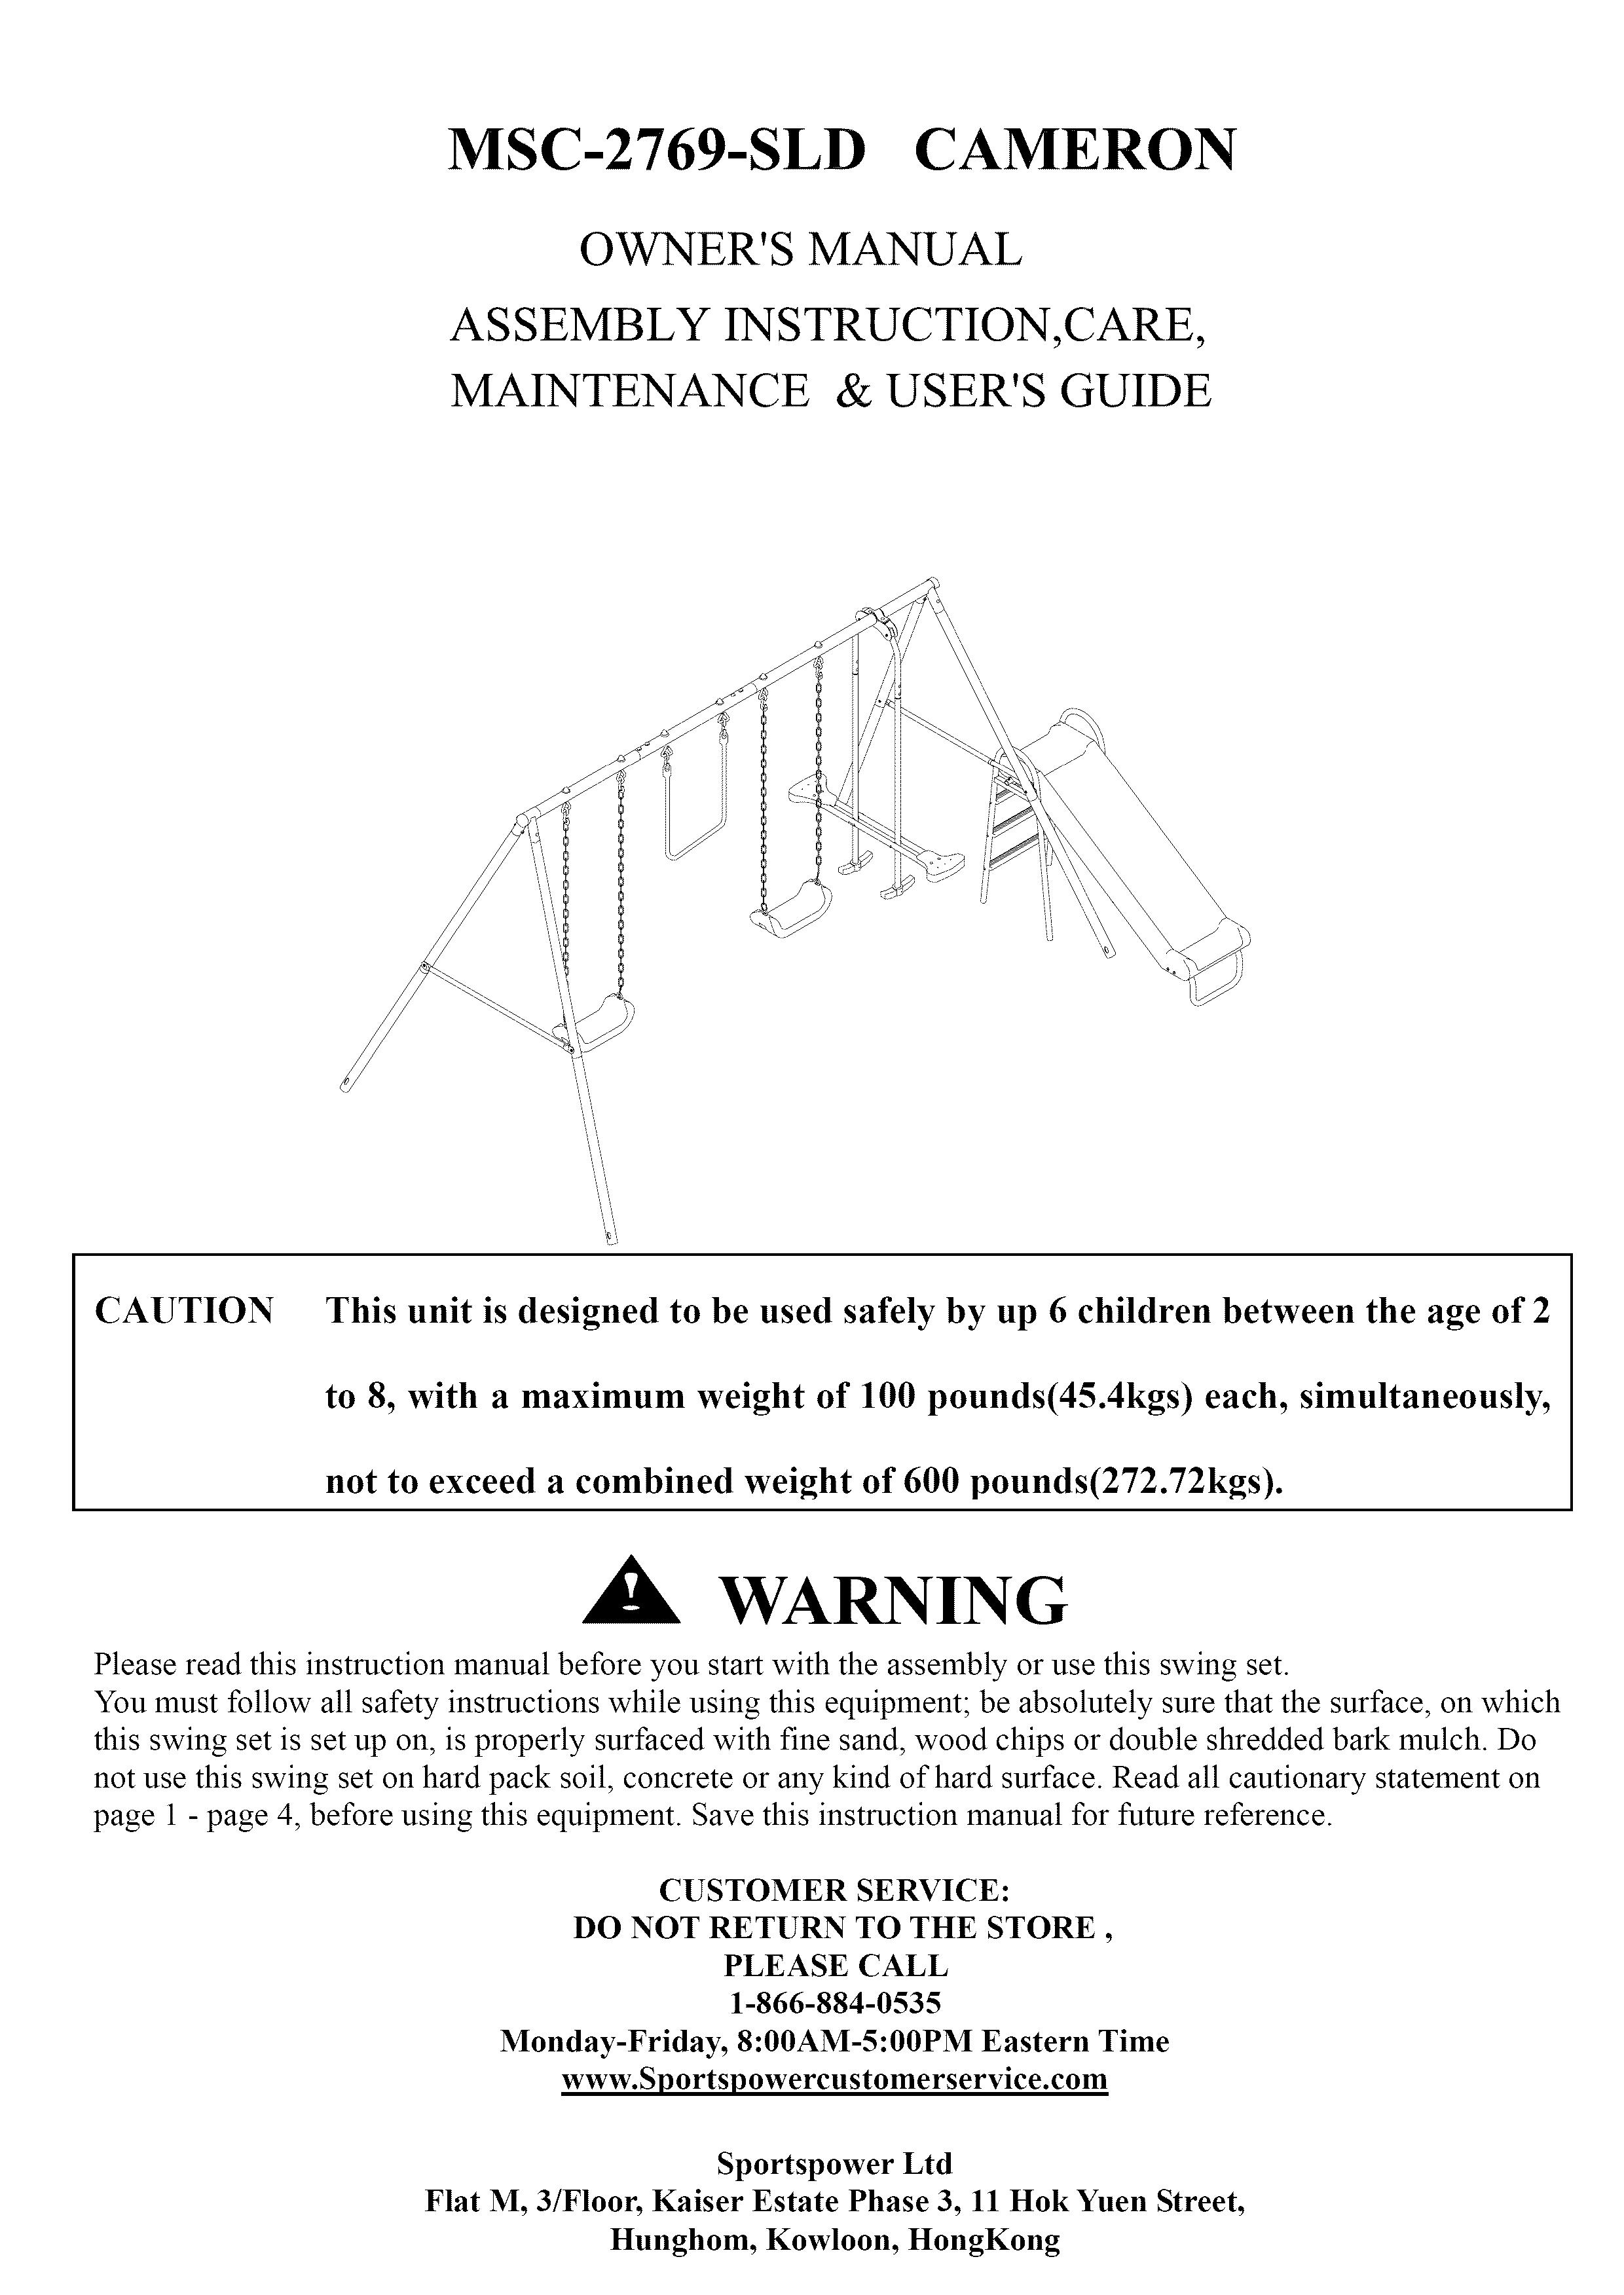 Camerons Products MSC-2769-SLD Backyard Playset User Manual (Page 1)